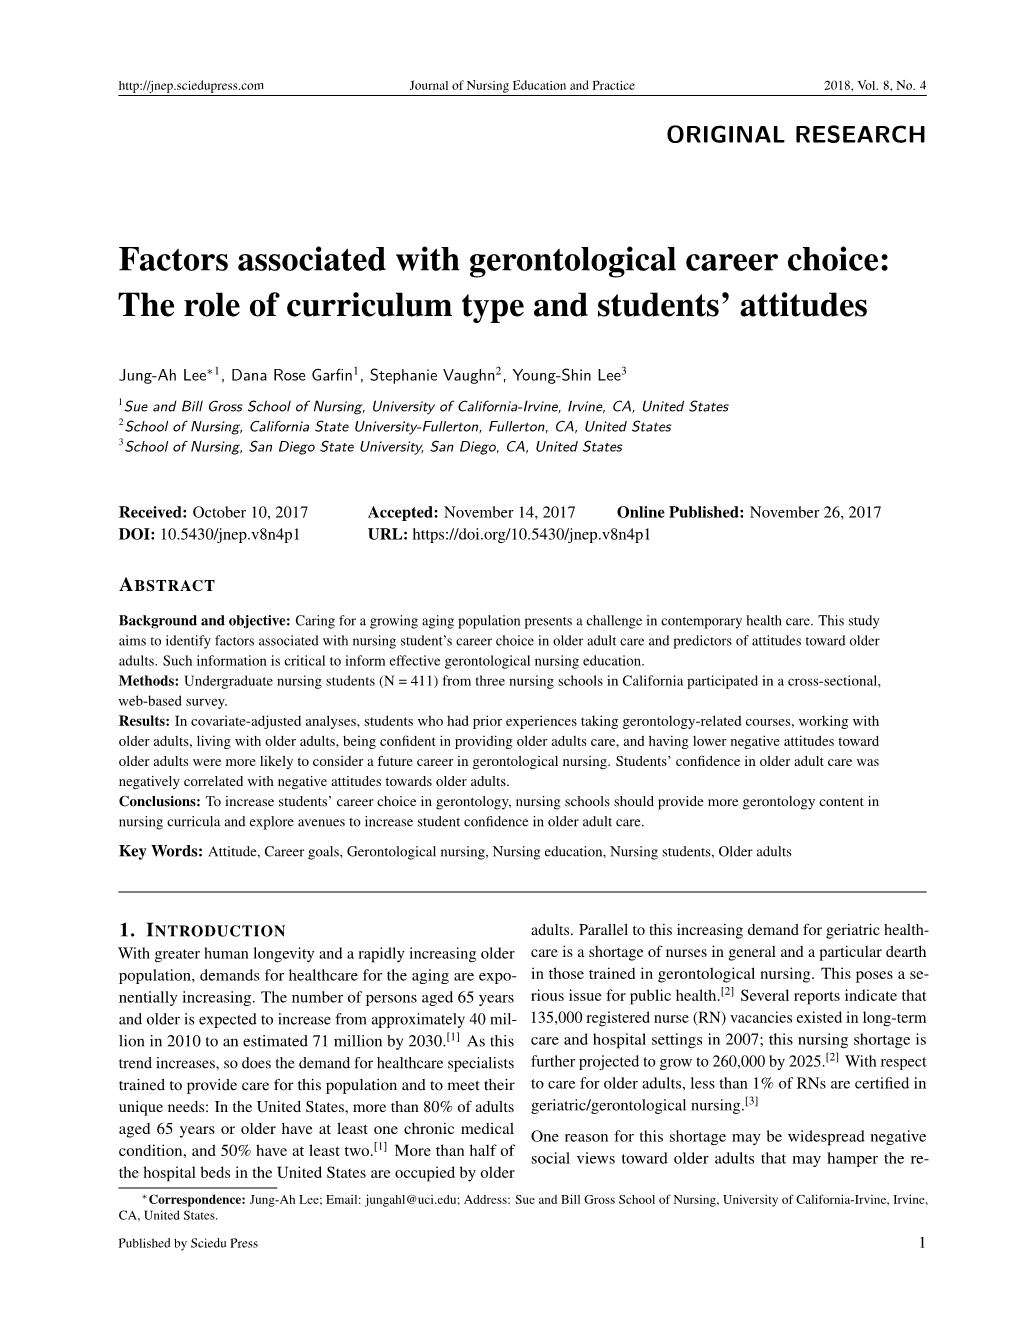 Factors Associated with Gerontological Career Choice: the Role of Curriculum Type and Students’ Attitudes